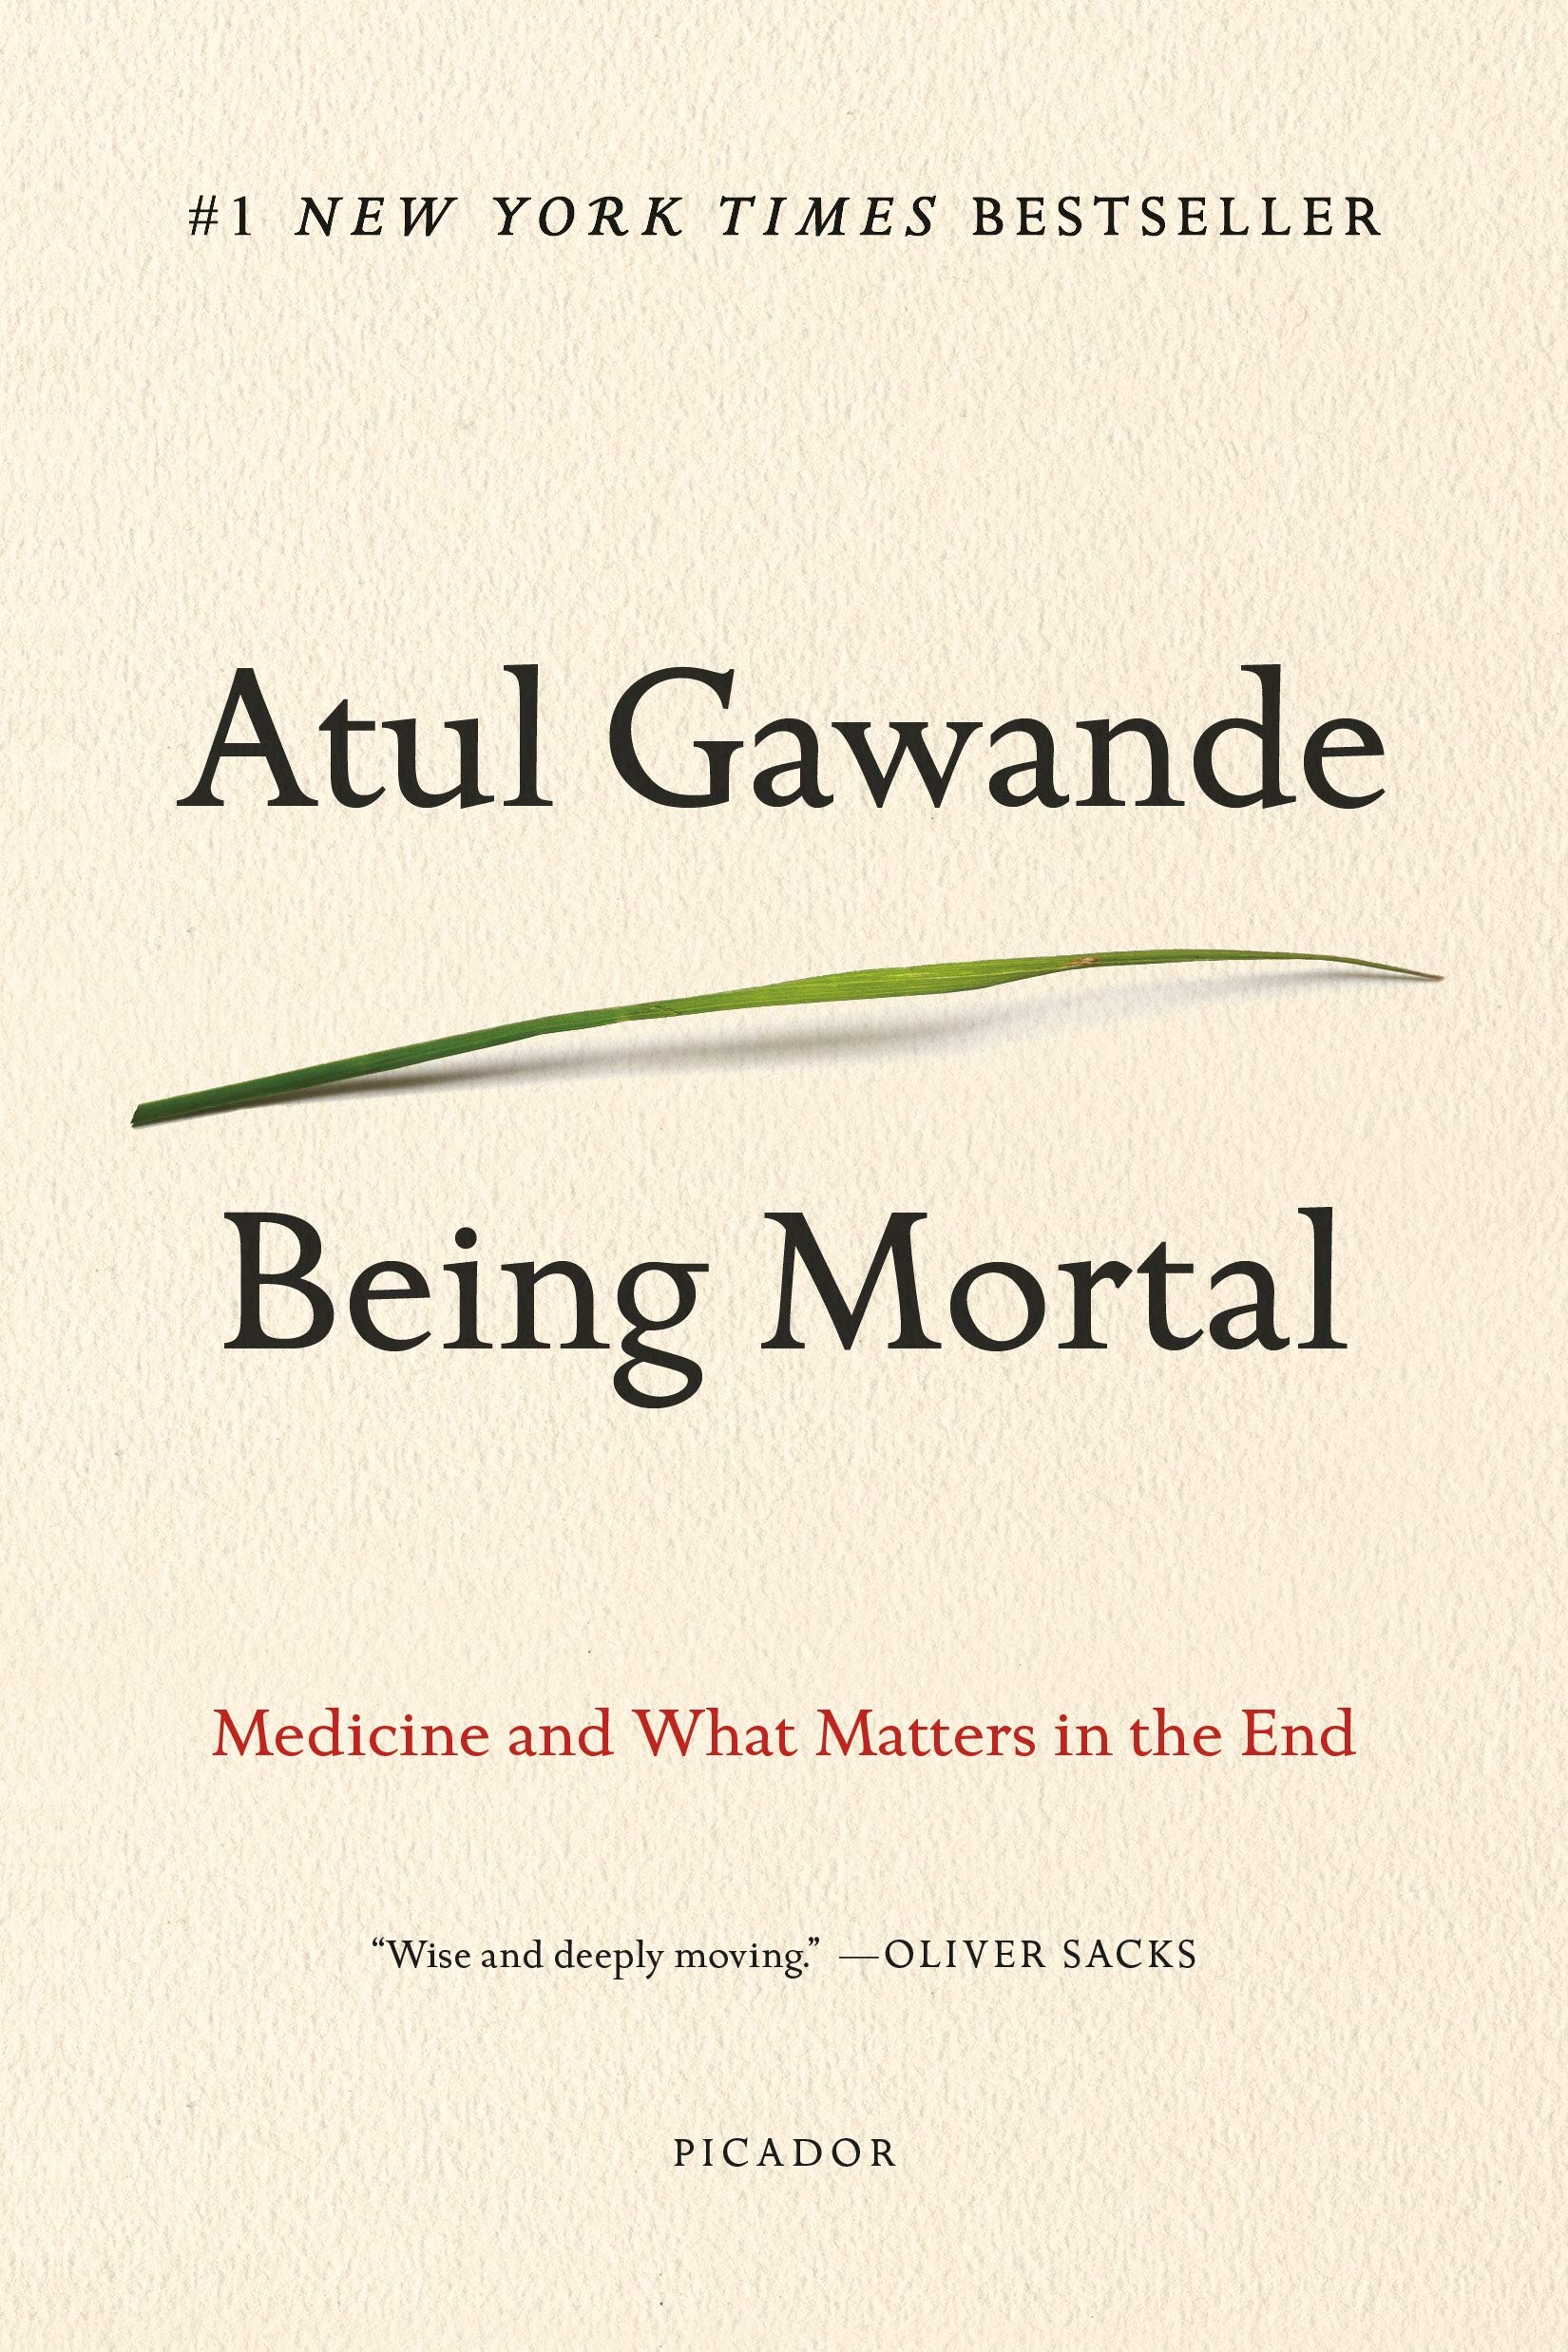 Being Mortal: Medicine and What Matters in the End by Gawande, Atul